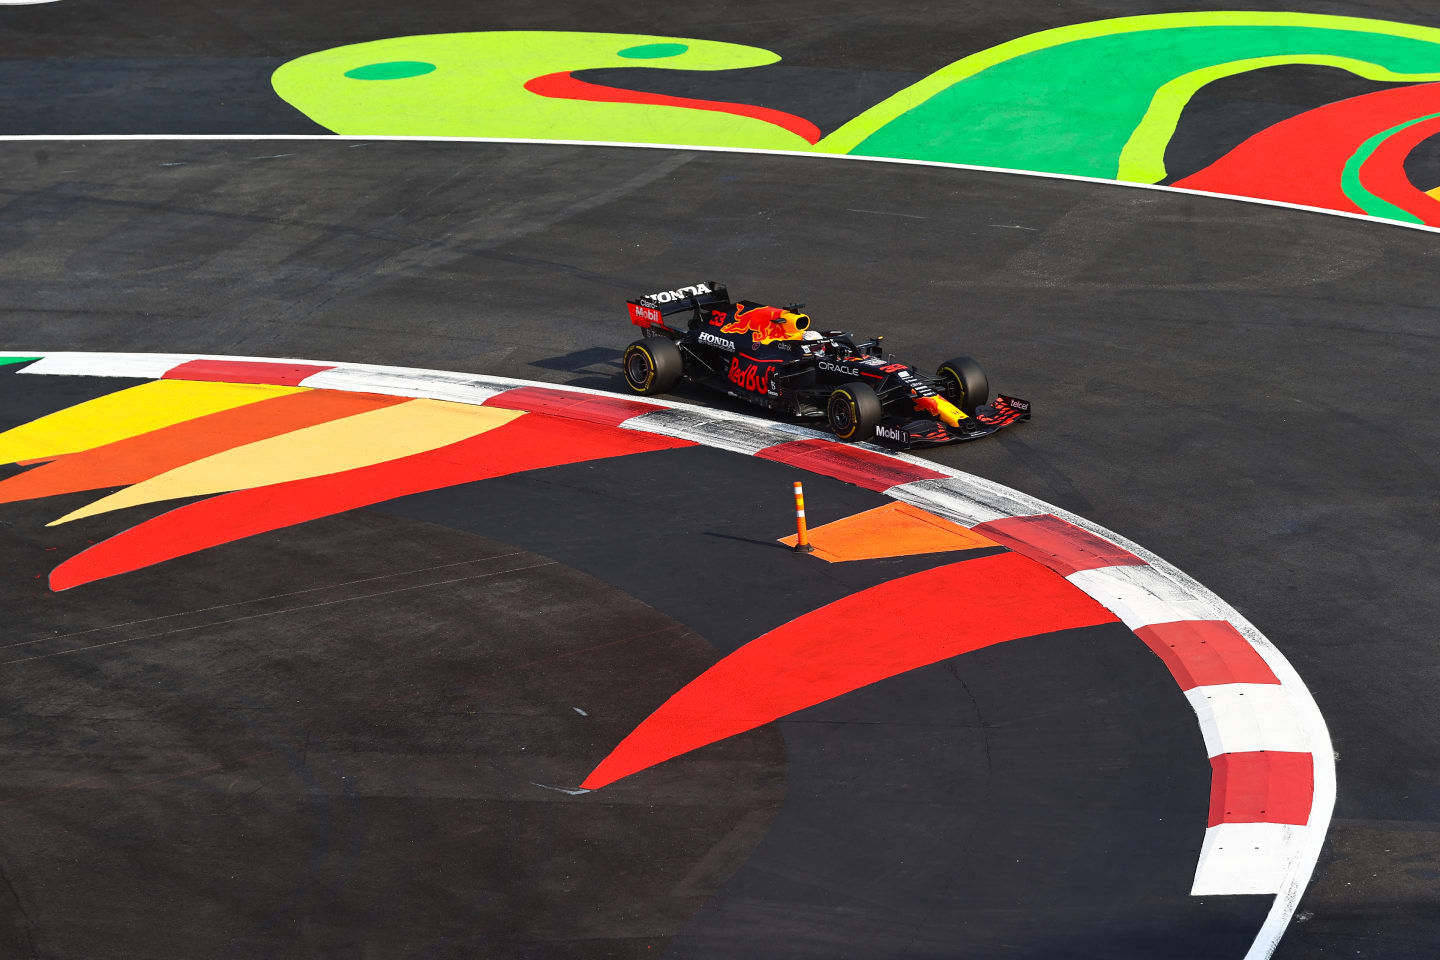 MEXICO CITY, MEXICO - NOVEMBER 05: Max Verstappen of the Netherlands driving the (33) Red Bull Racing RB16B Honda during practice ahead of the F1 Grand Prix of Mexico at Autodromo Hermanos Rodriguez on November 05, 2021 in Mexico City, Mexico. (Photo by Mark Thompson/Getty Images)